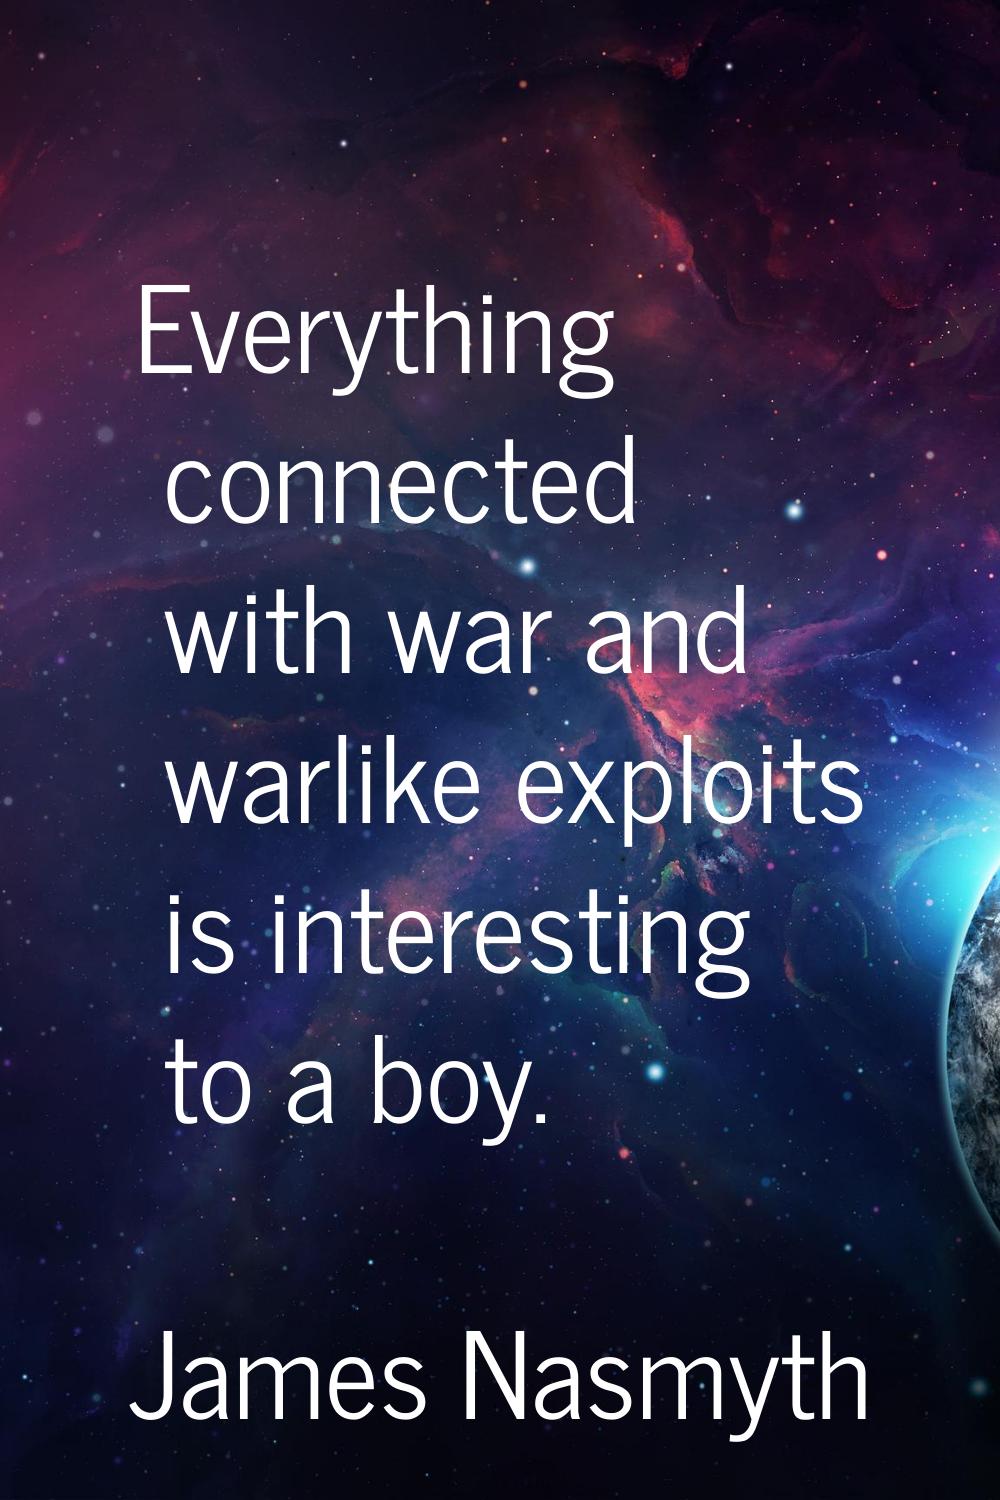 Everything connected with war and warlike exploits is interesting to a boy.